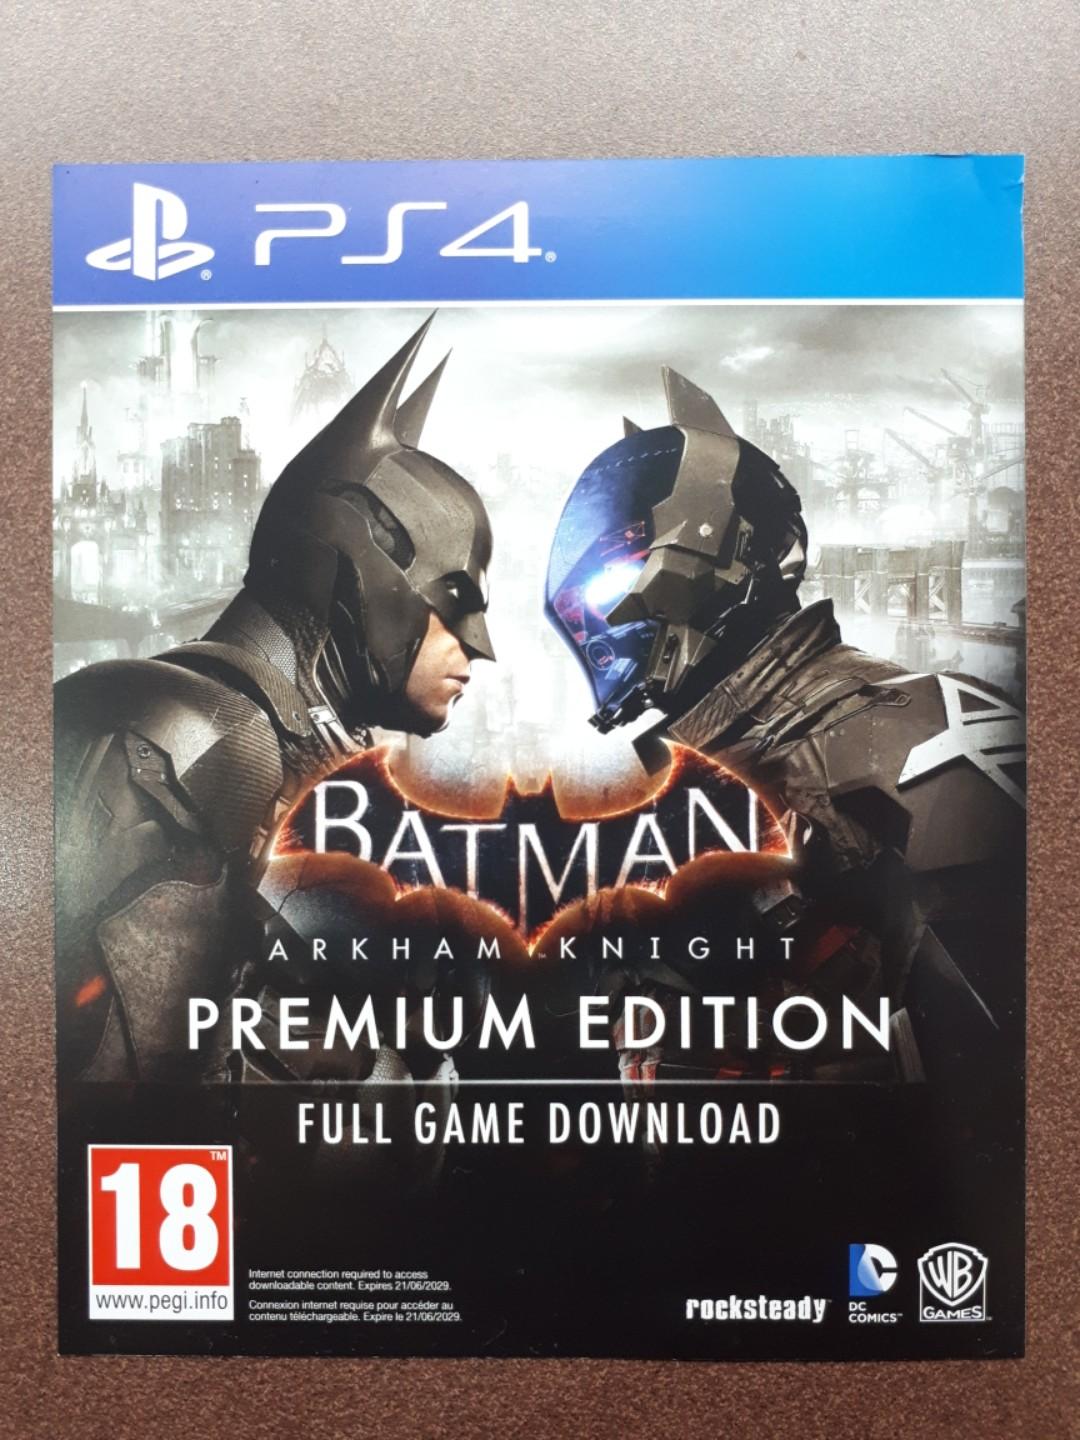 Batman Arkham Knight Premium Goty Complete Edition Ps4 Video Gaming Video Games On Carousell